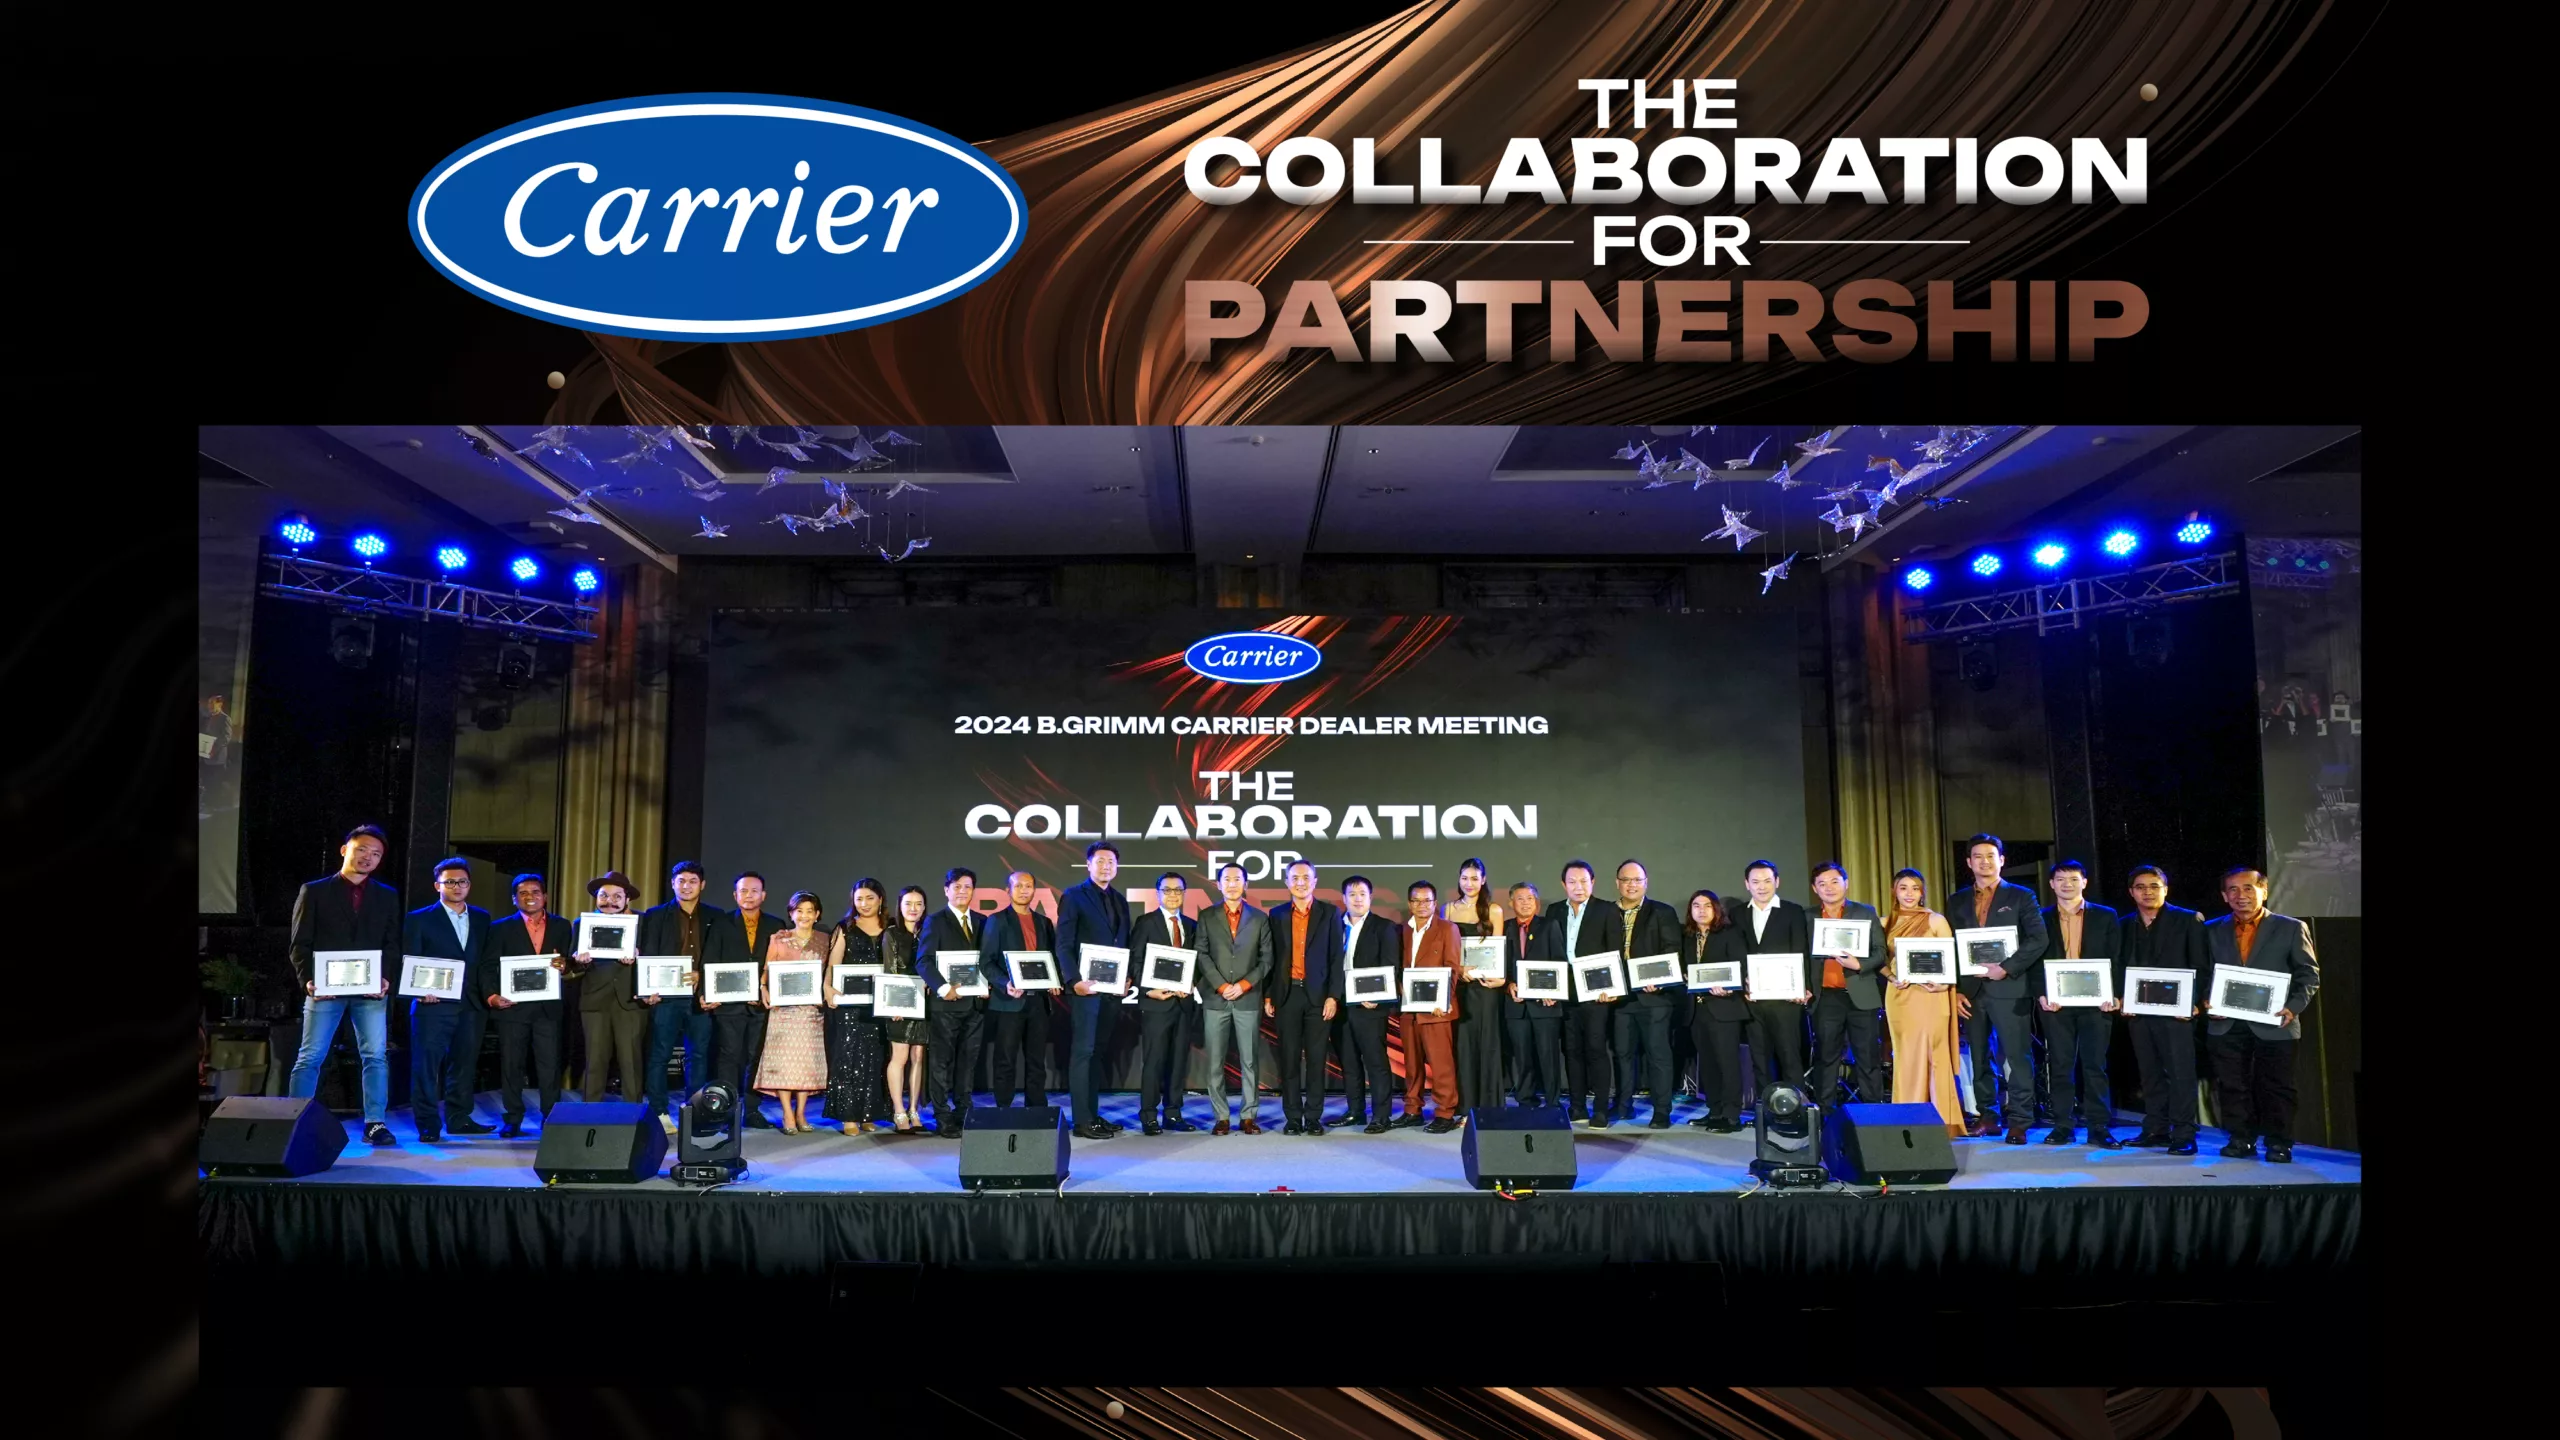 “THE COLLABORATION FOR PARTNERSHIP”